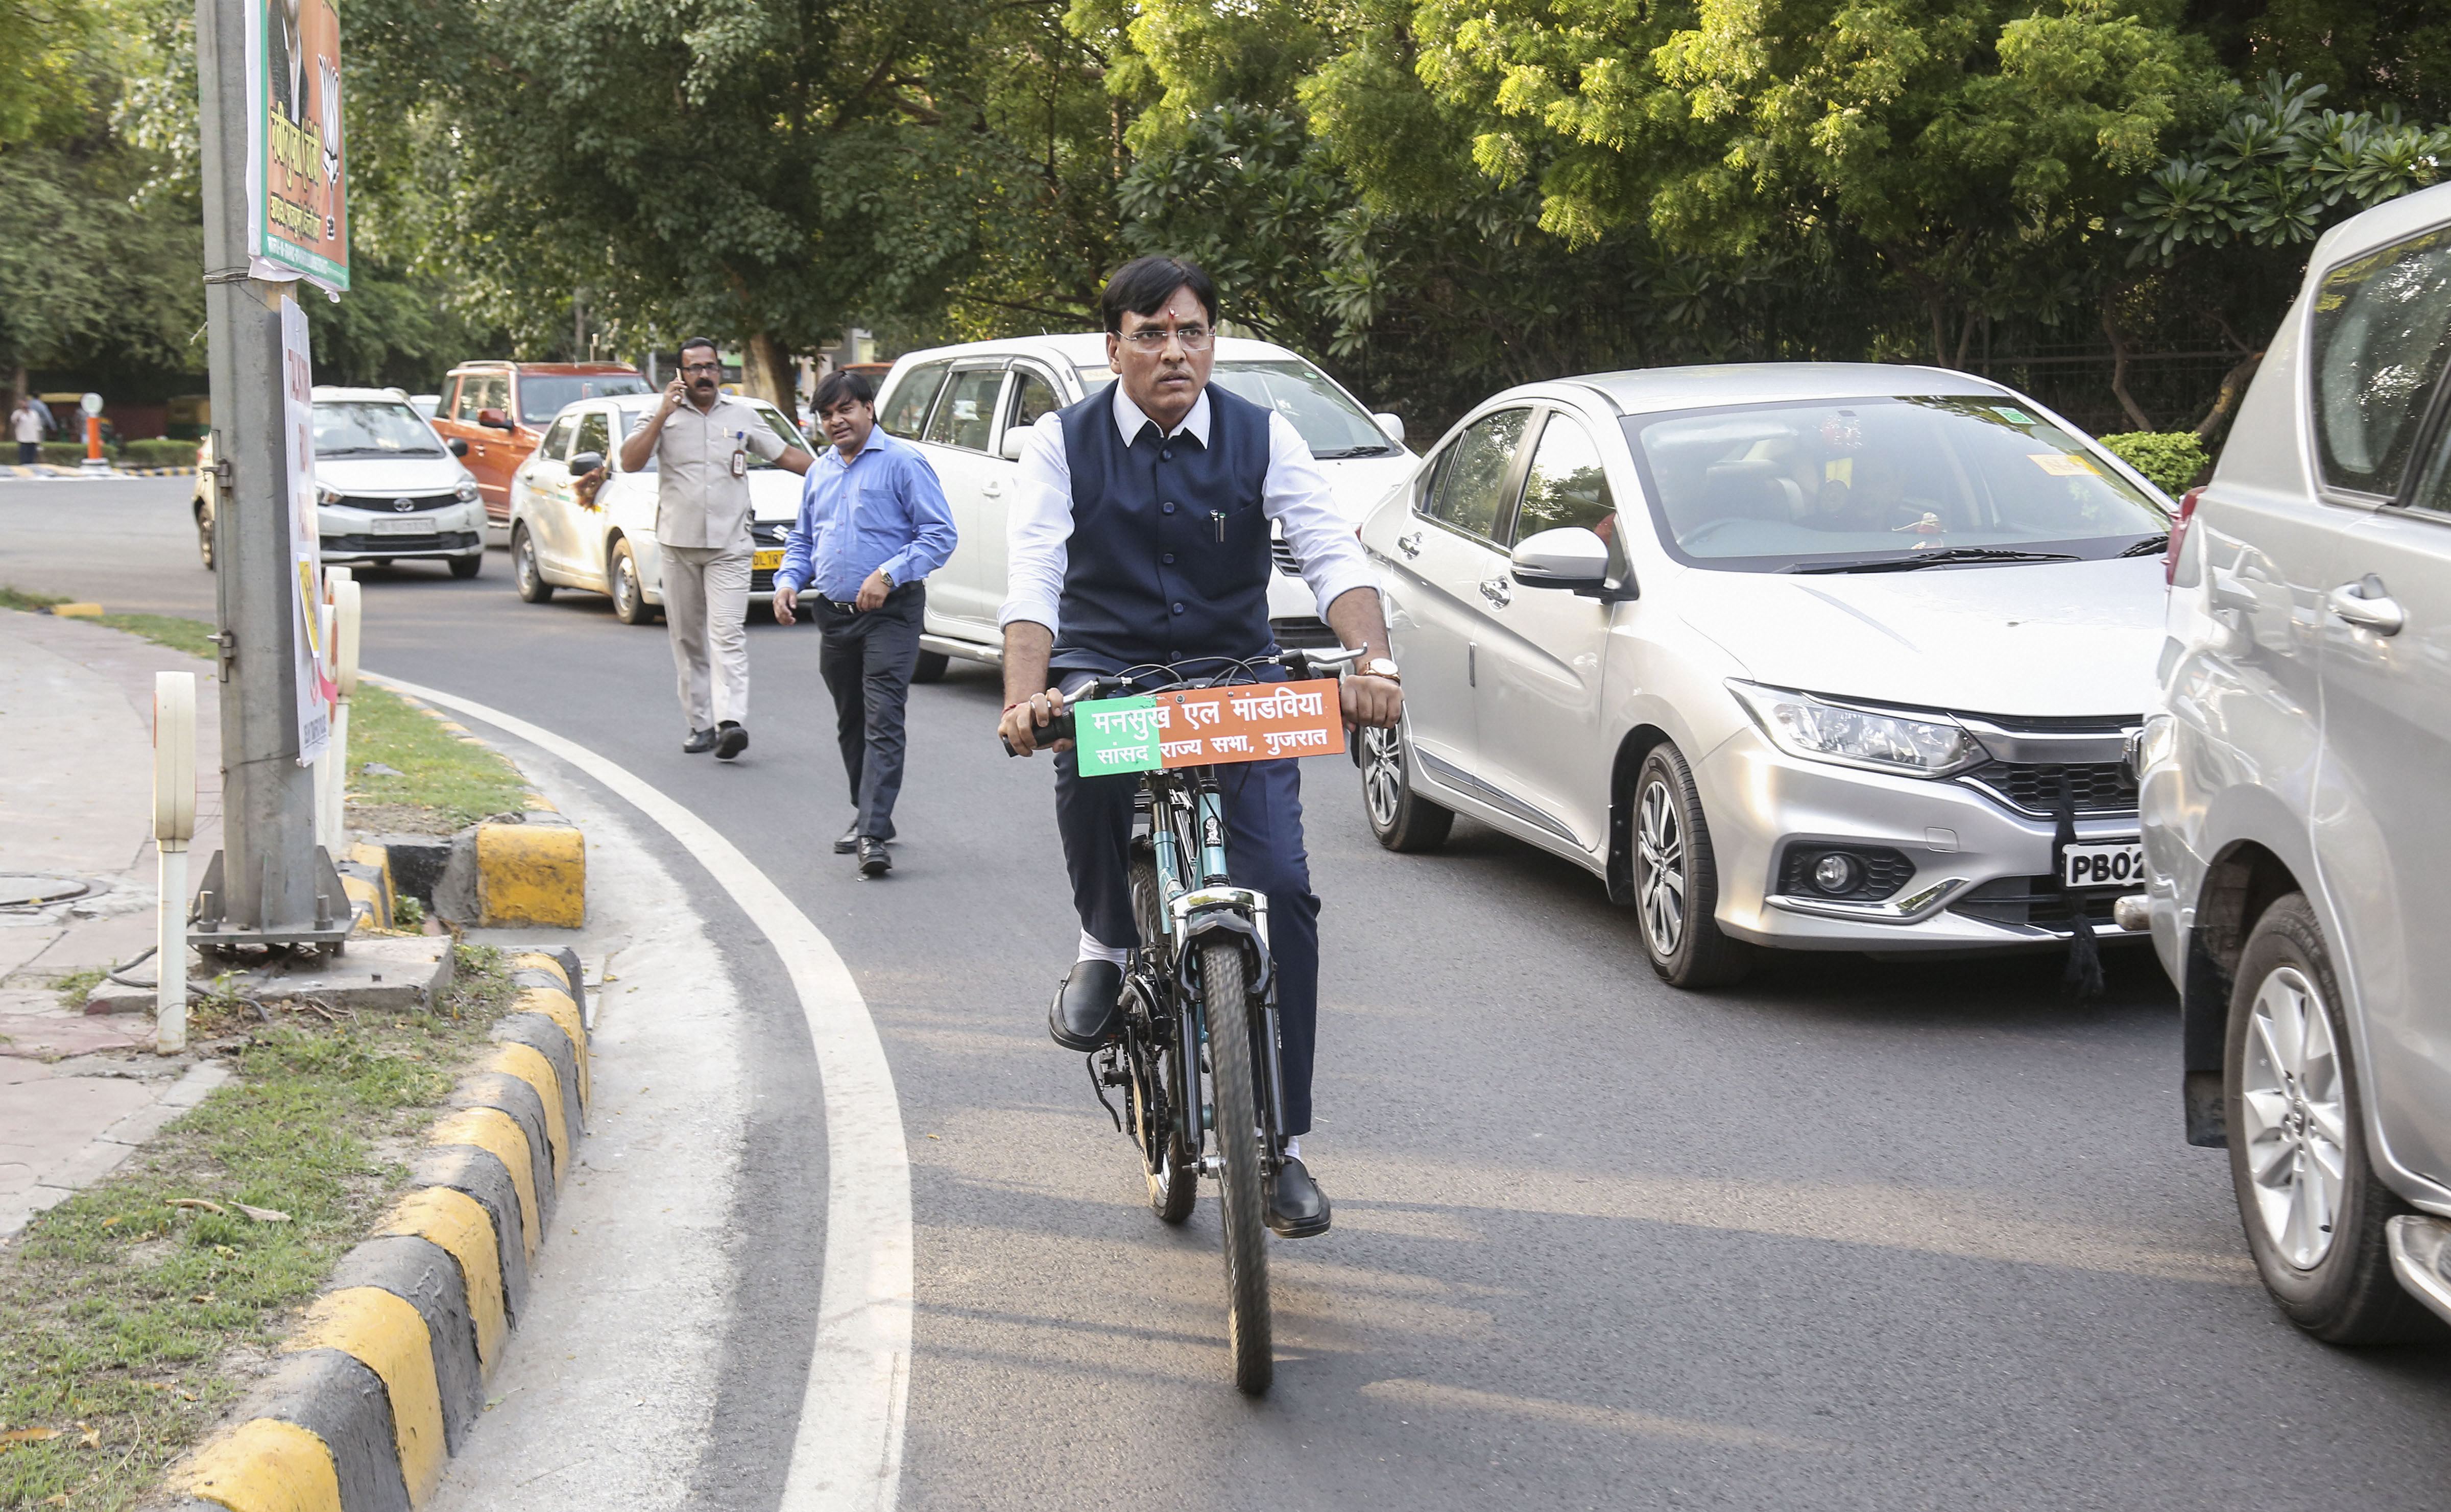 Meet the Parliamentarian who cycles to work, urges colleagues to go green